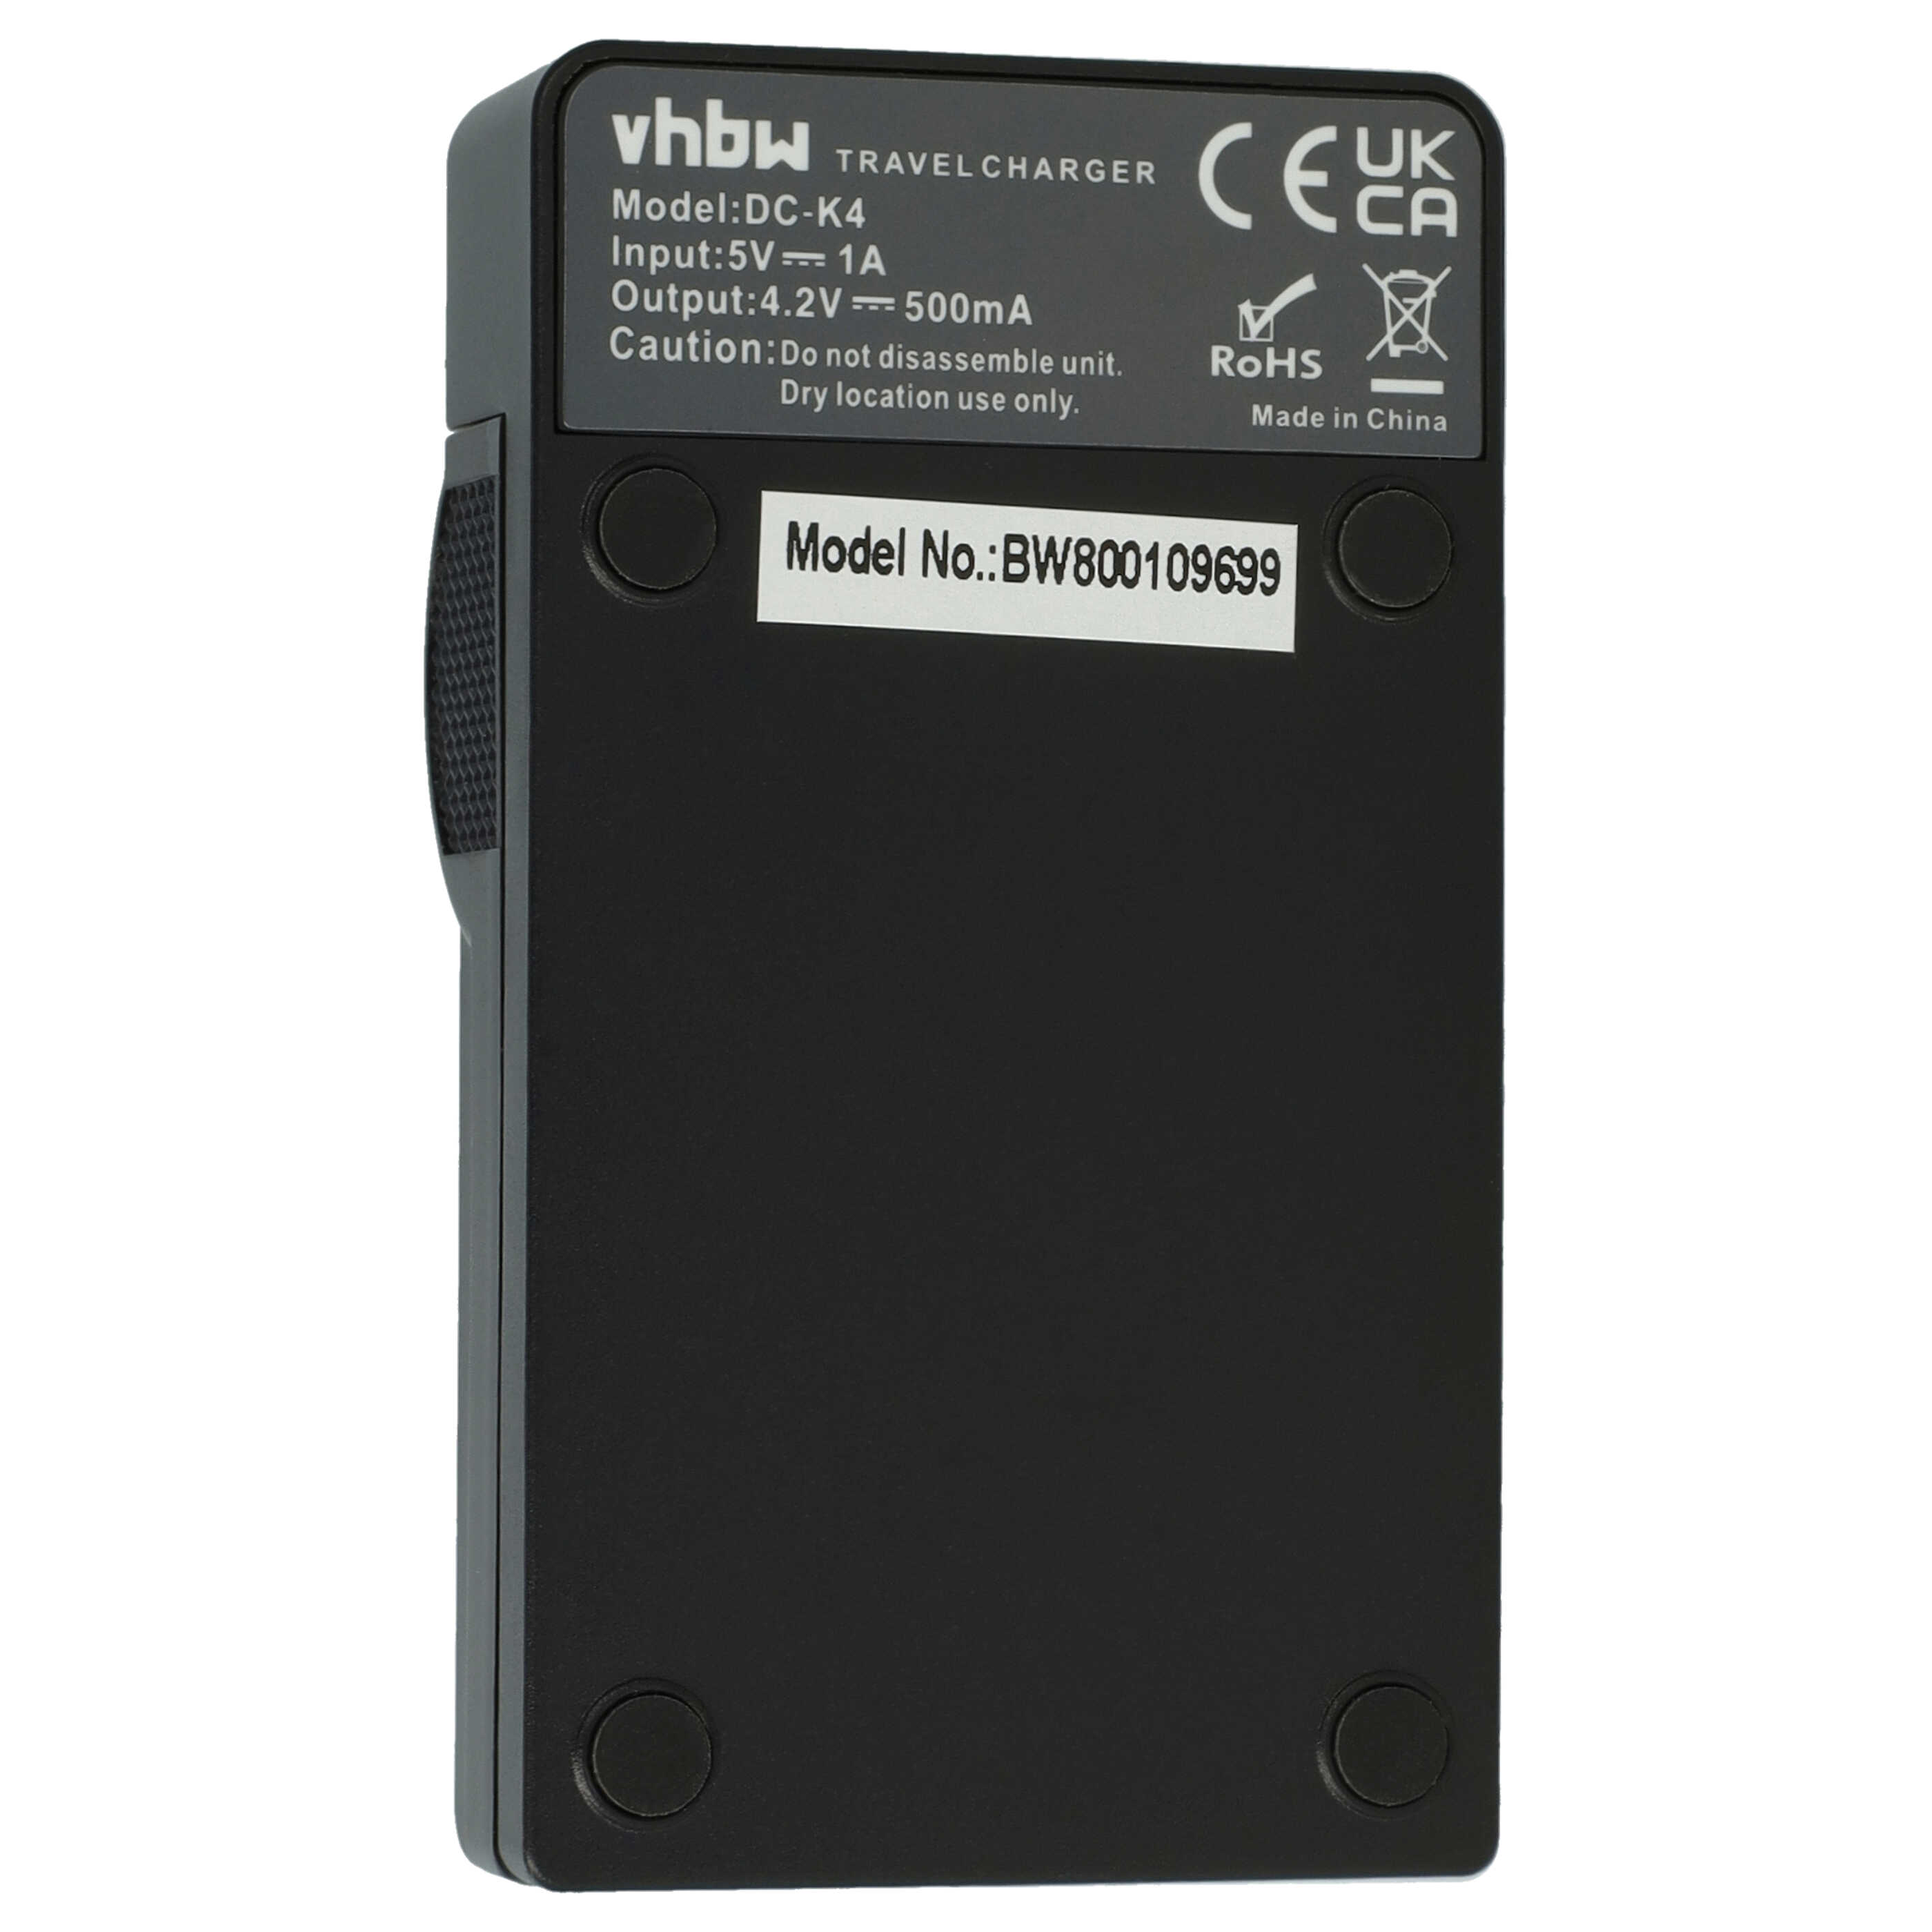 Battery Charger suitable for Casio NP-70 Camera etc. - 0.5 A, 4.2 V